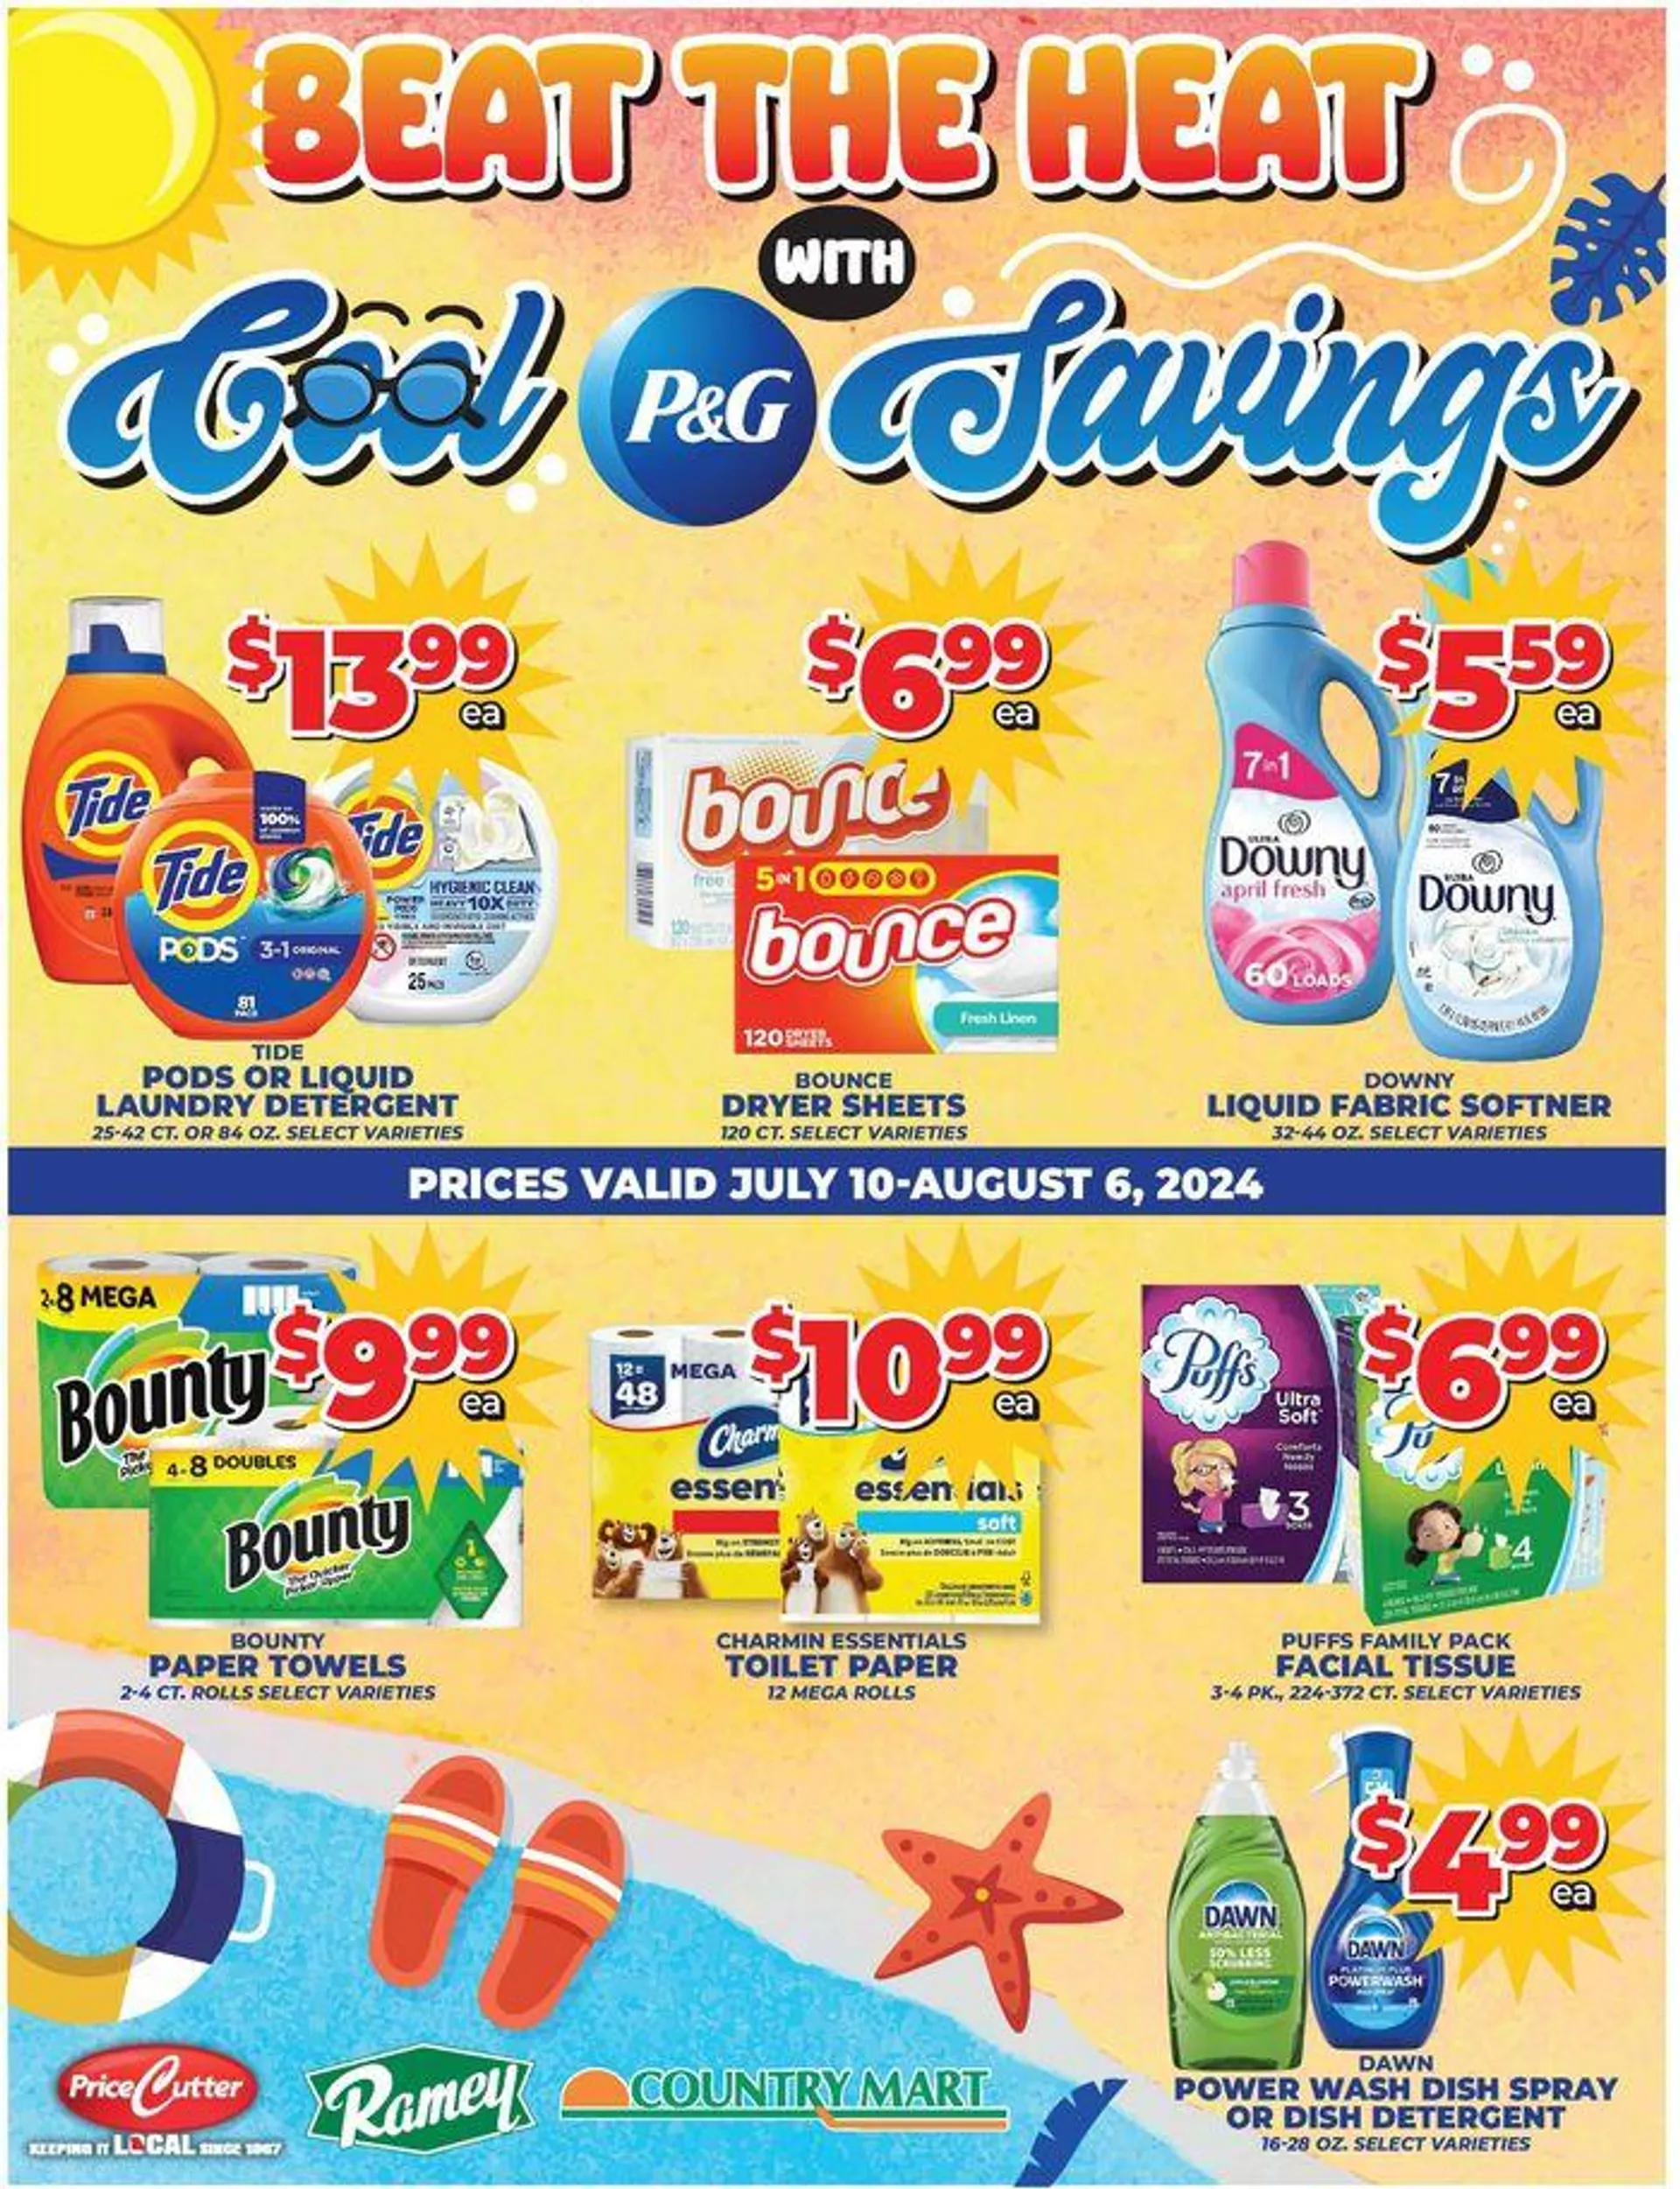 Beat The Heat With Cool Savings - 1